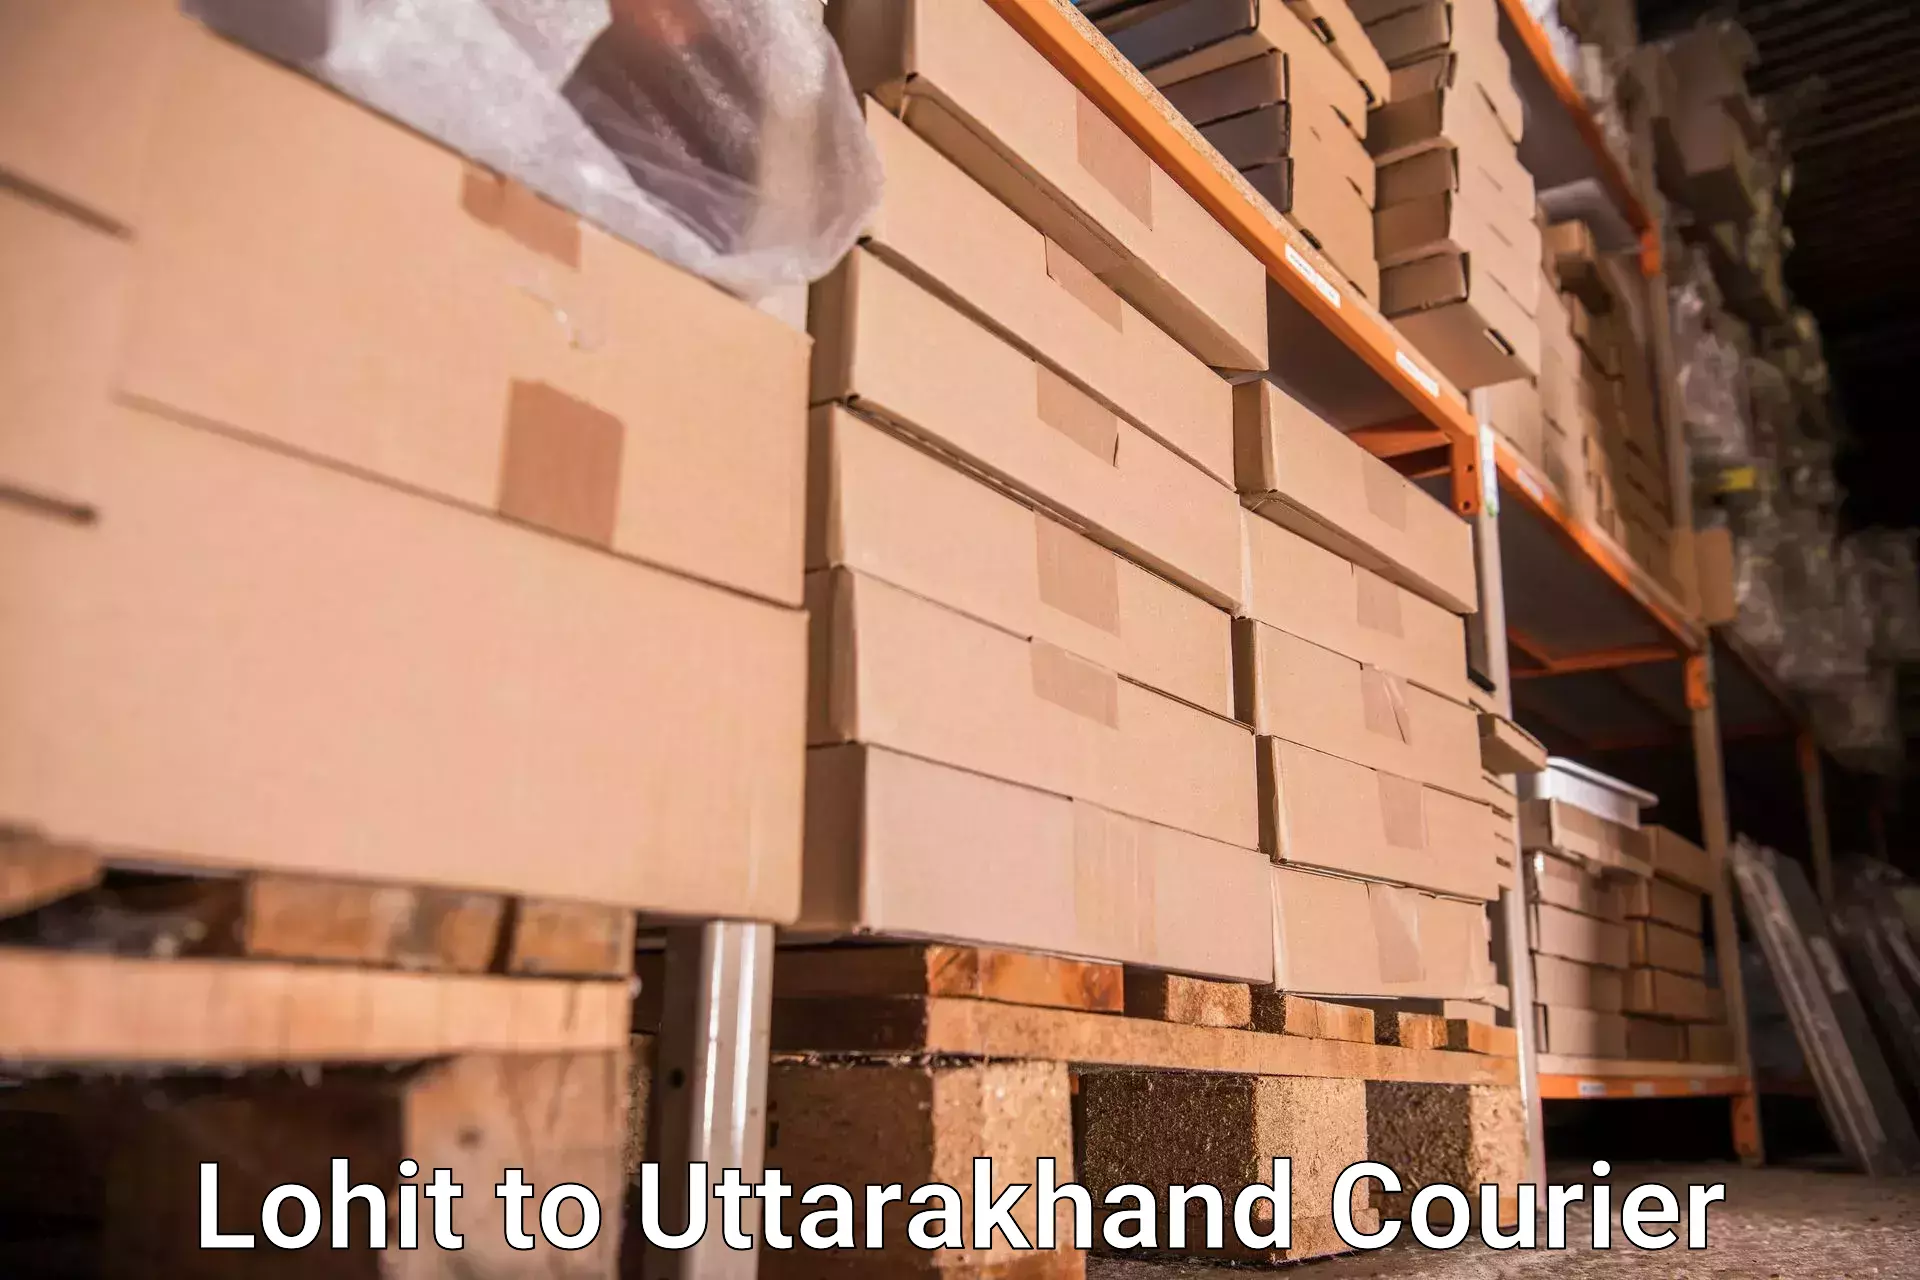 Luggage shipping service Lohit to Rudrapur